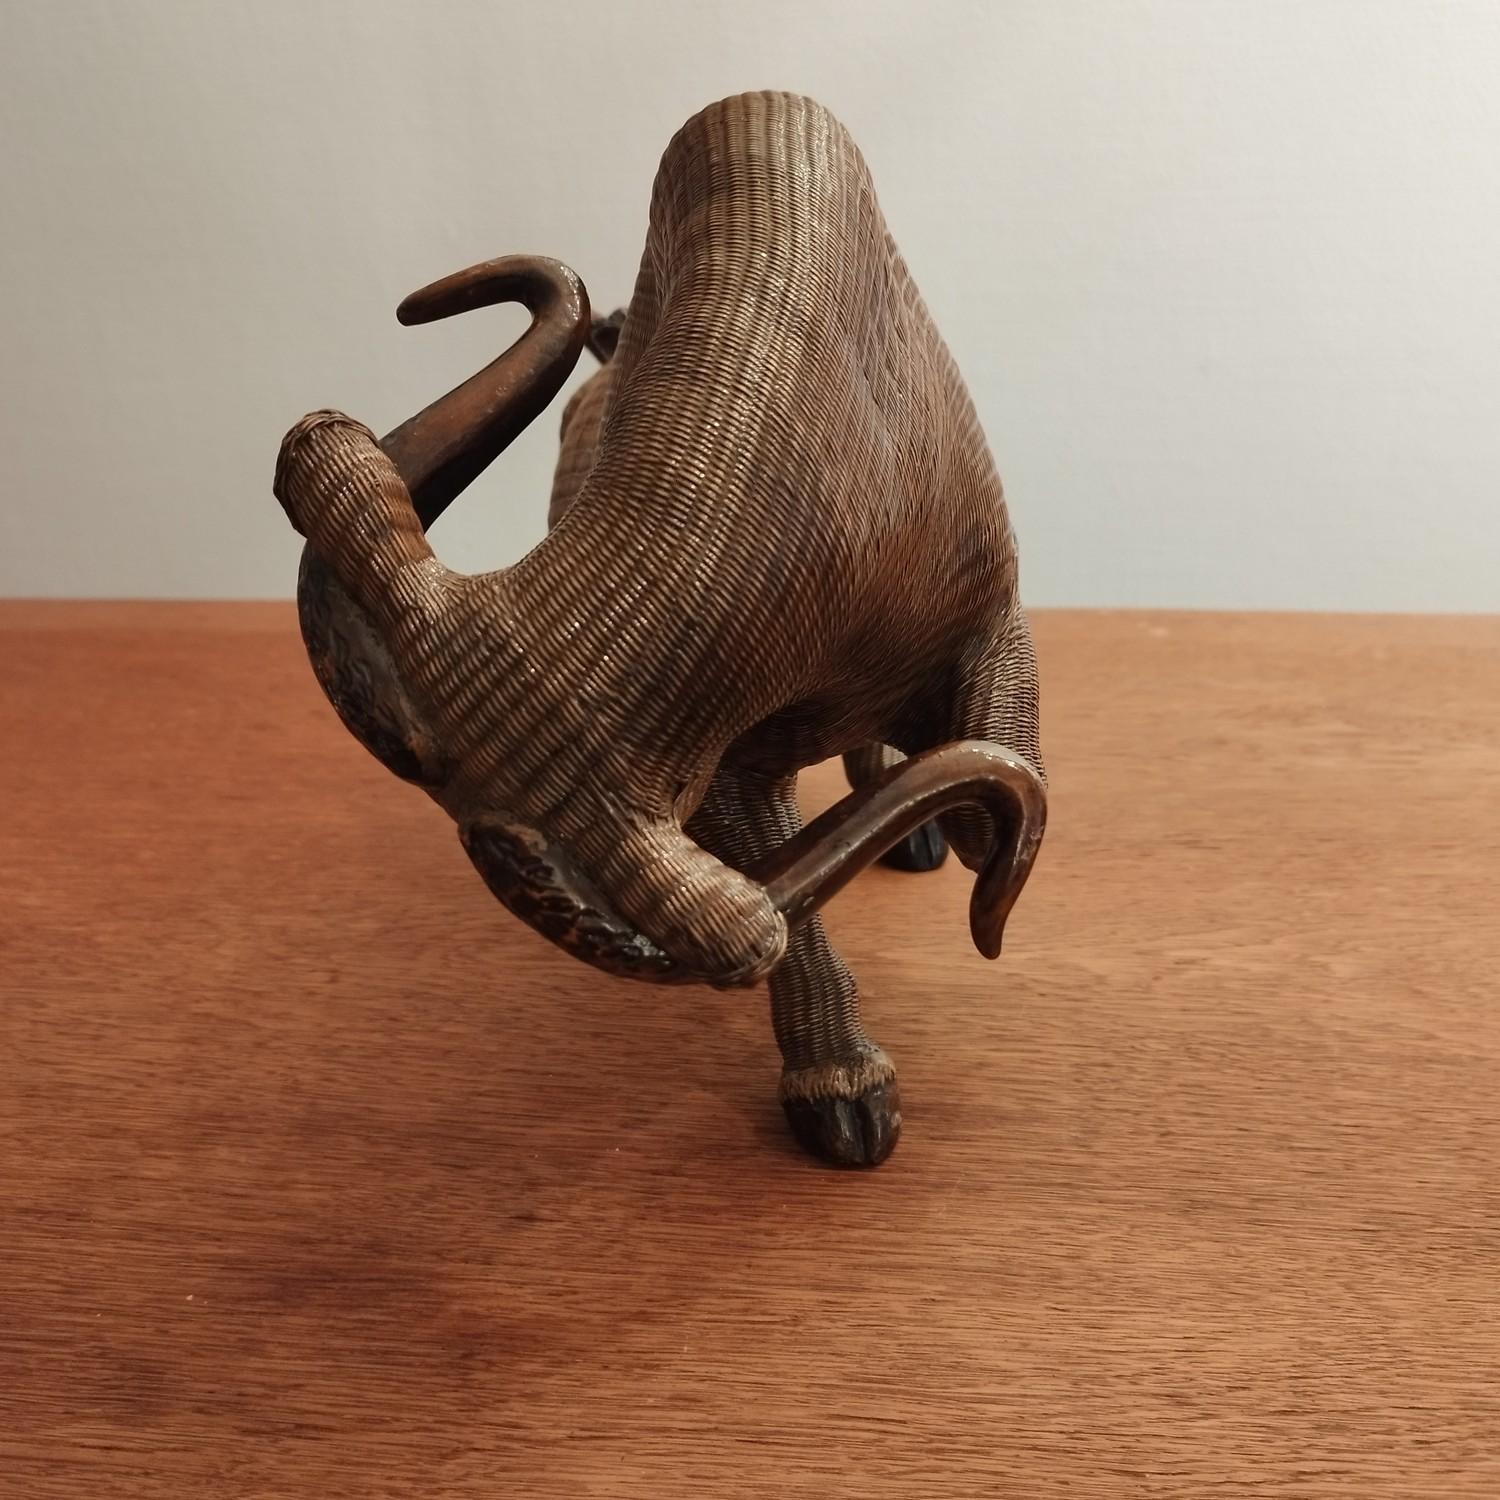 Lovely bull sculpture, made out of rattan. Origin Spain?.